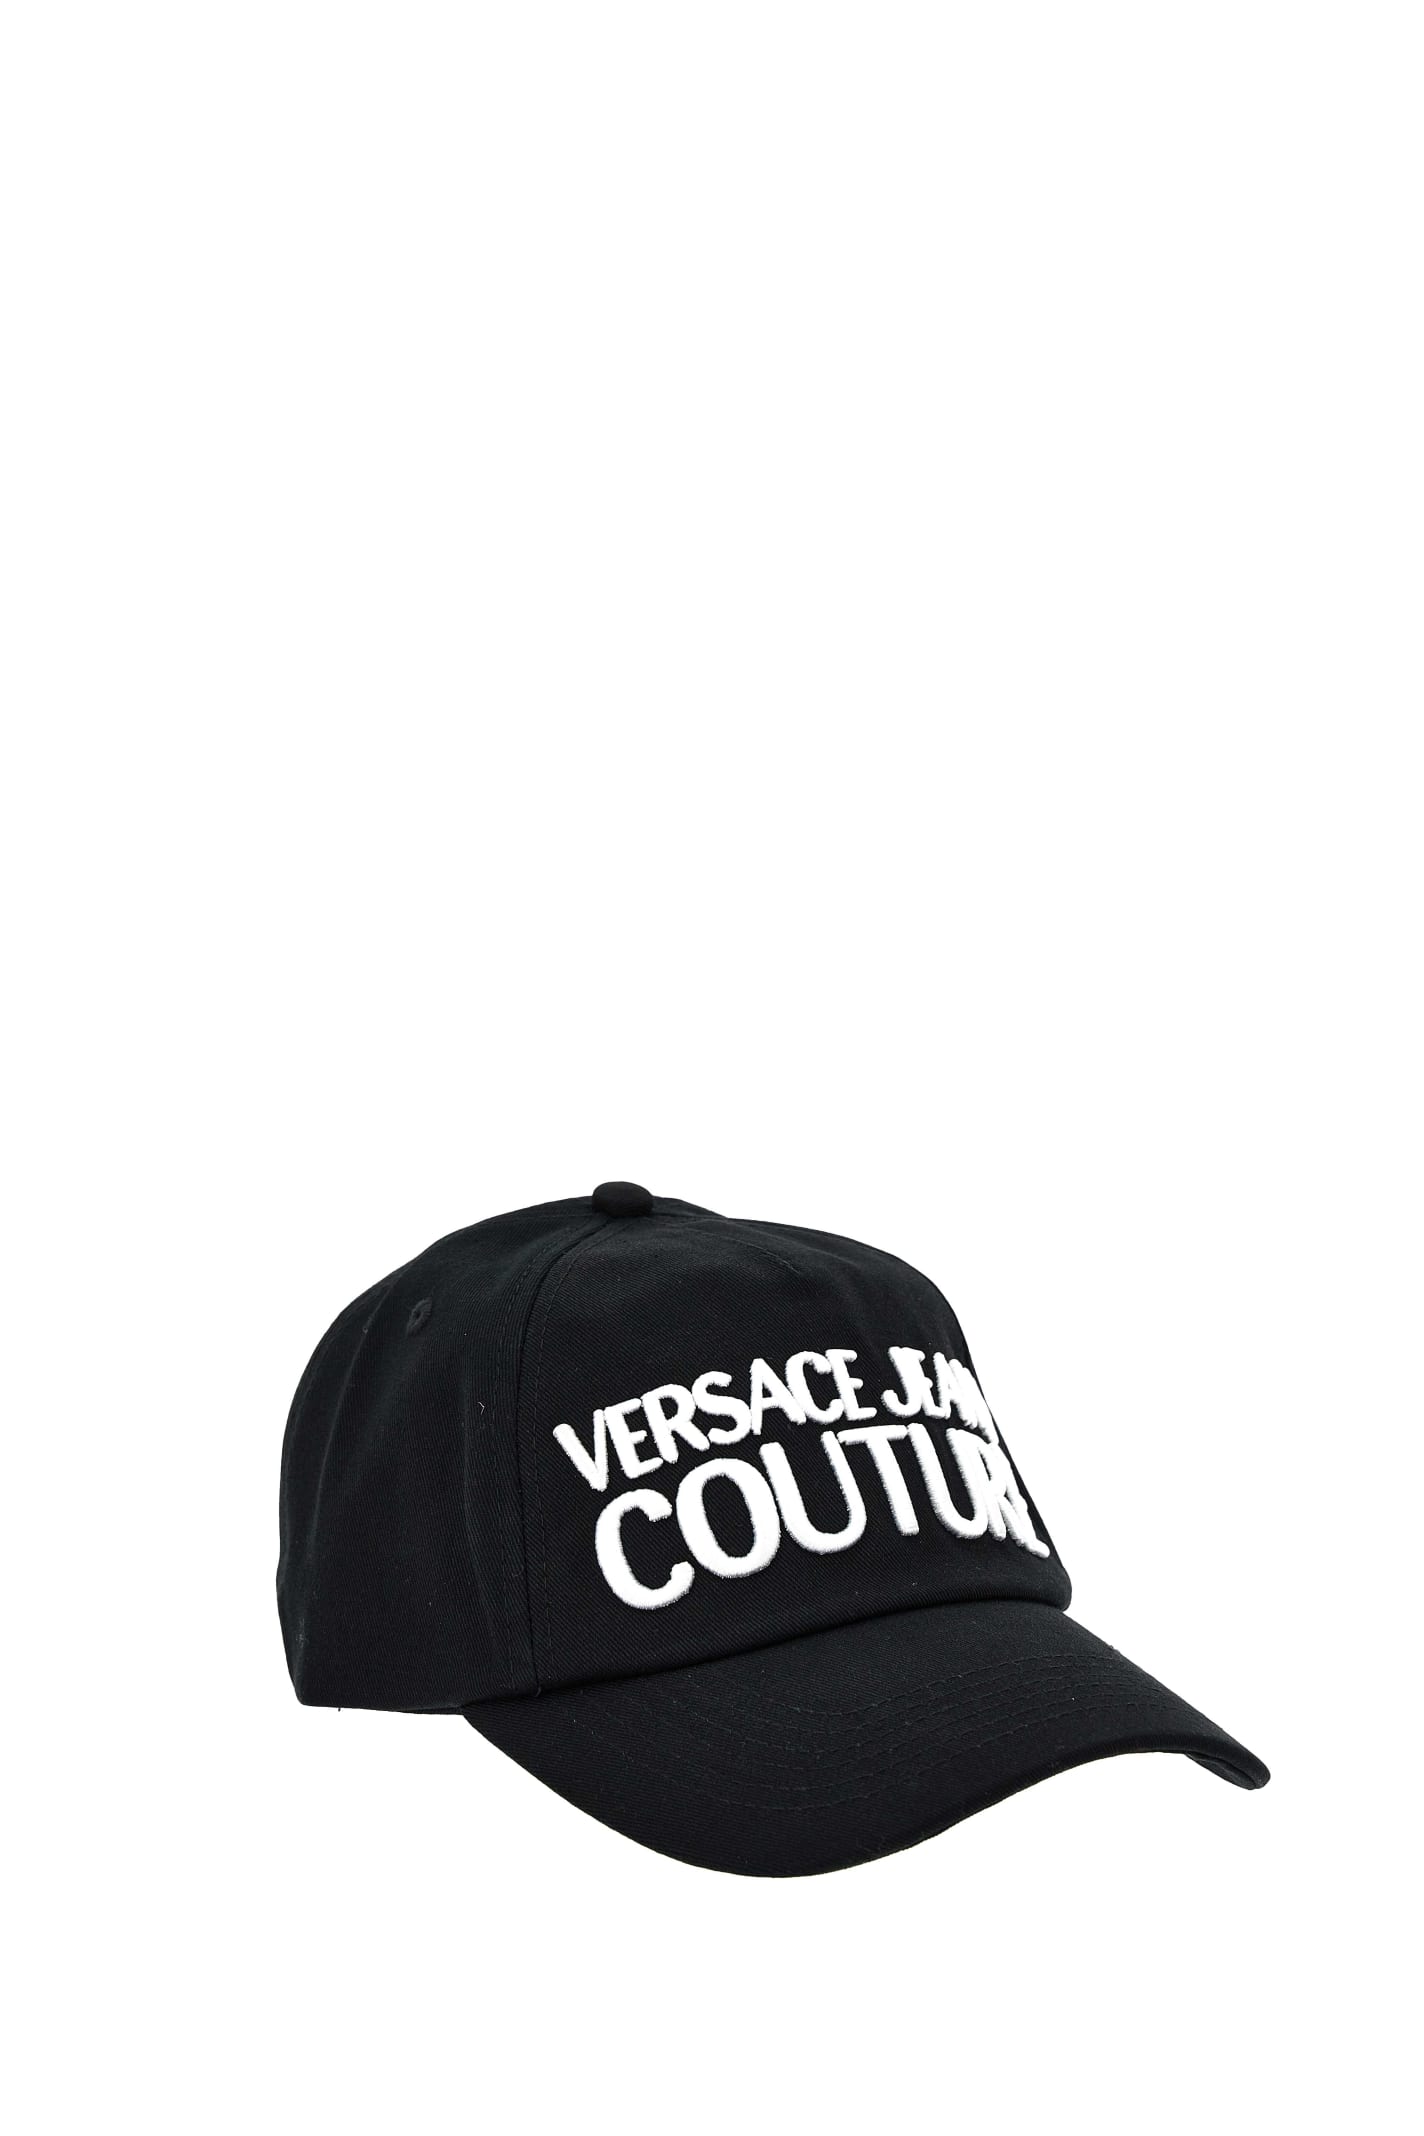 VERSACE JEANS COUTURE VERSACE JEANS COUTURE LOGO-EMBROIDERED COTTON CAP